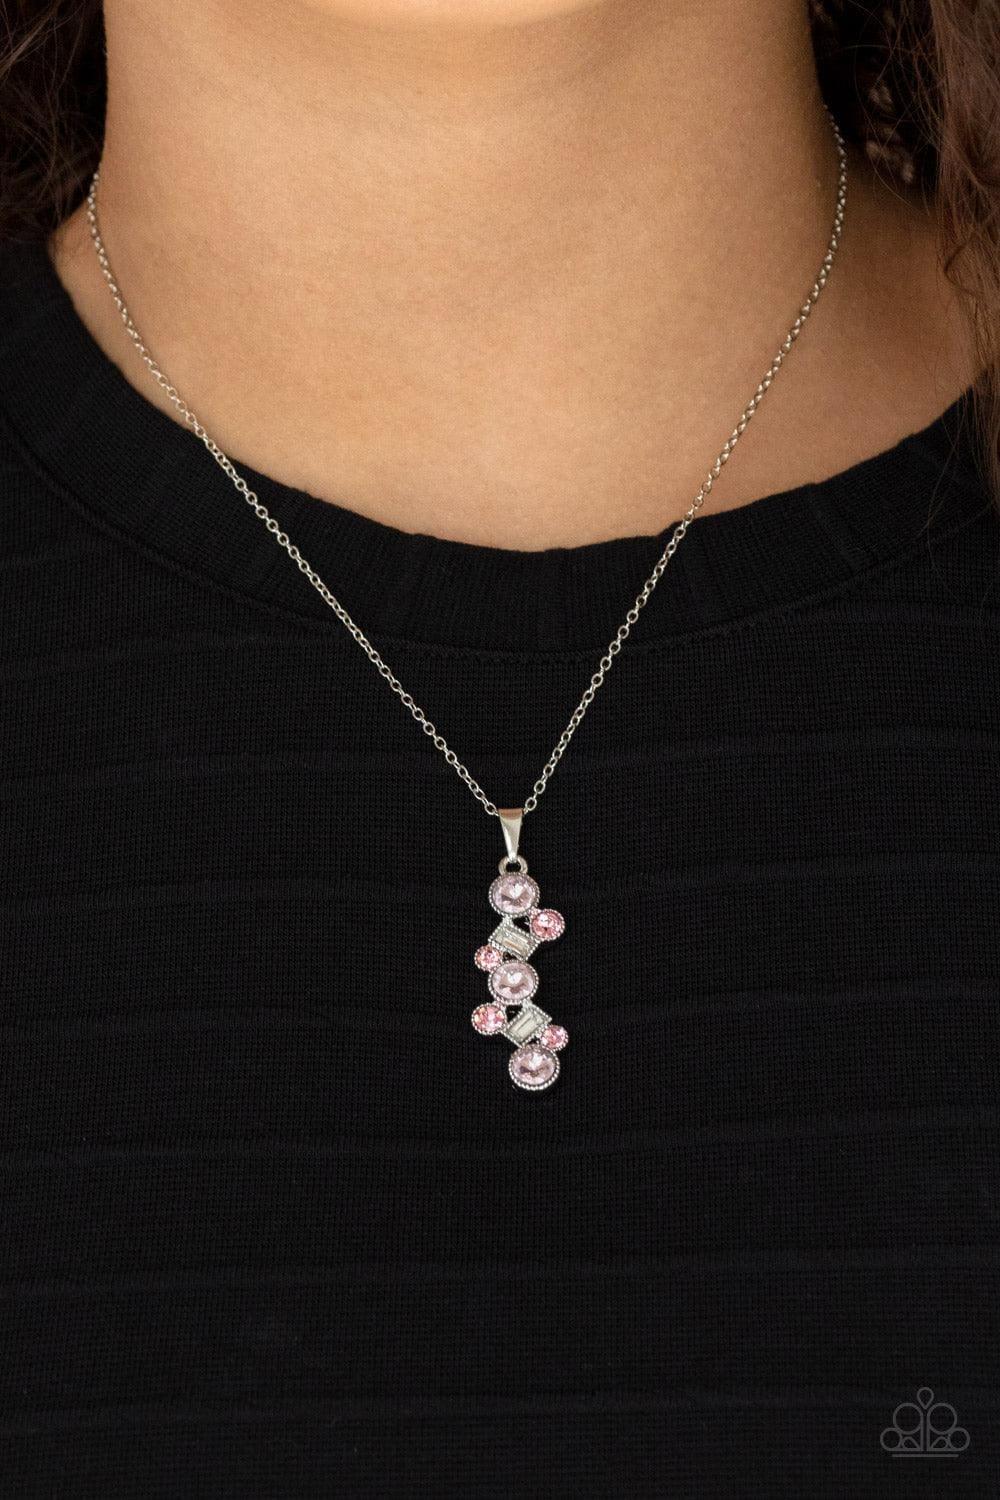 Paparazzi Accessories - Classically Clustered - Pink Dainty Necklace - Bling by JessieK